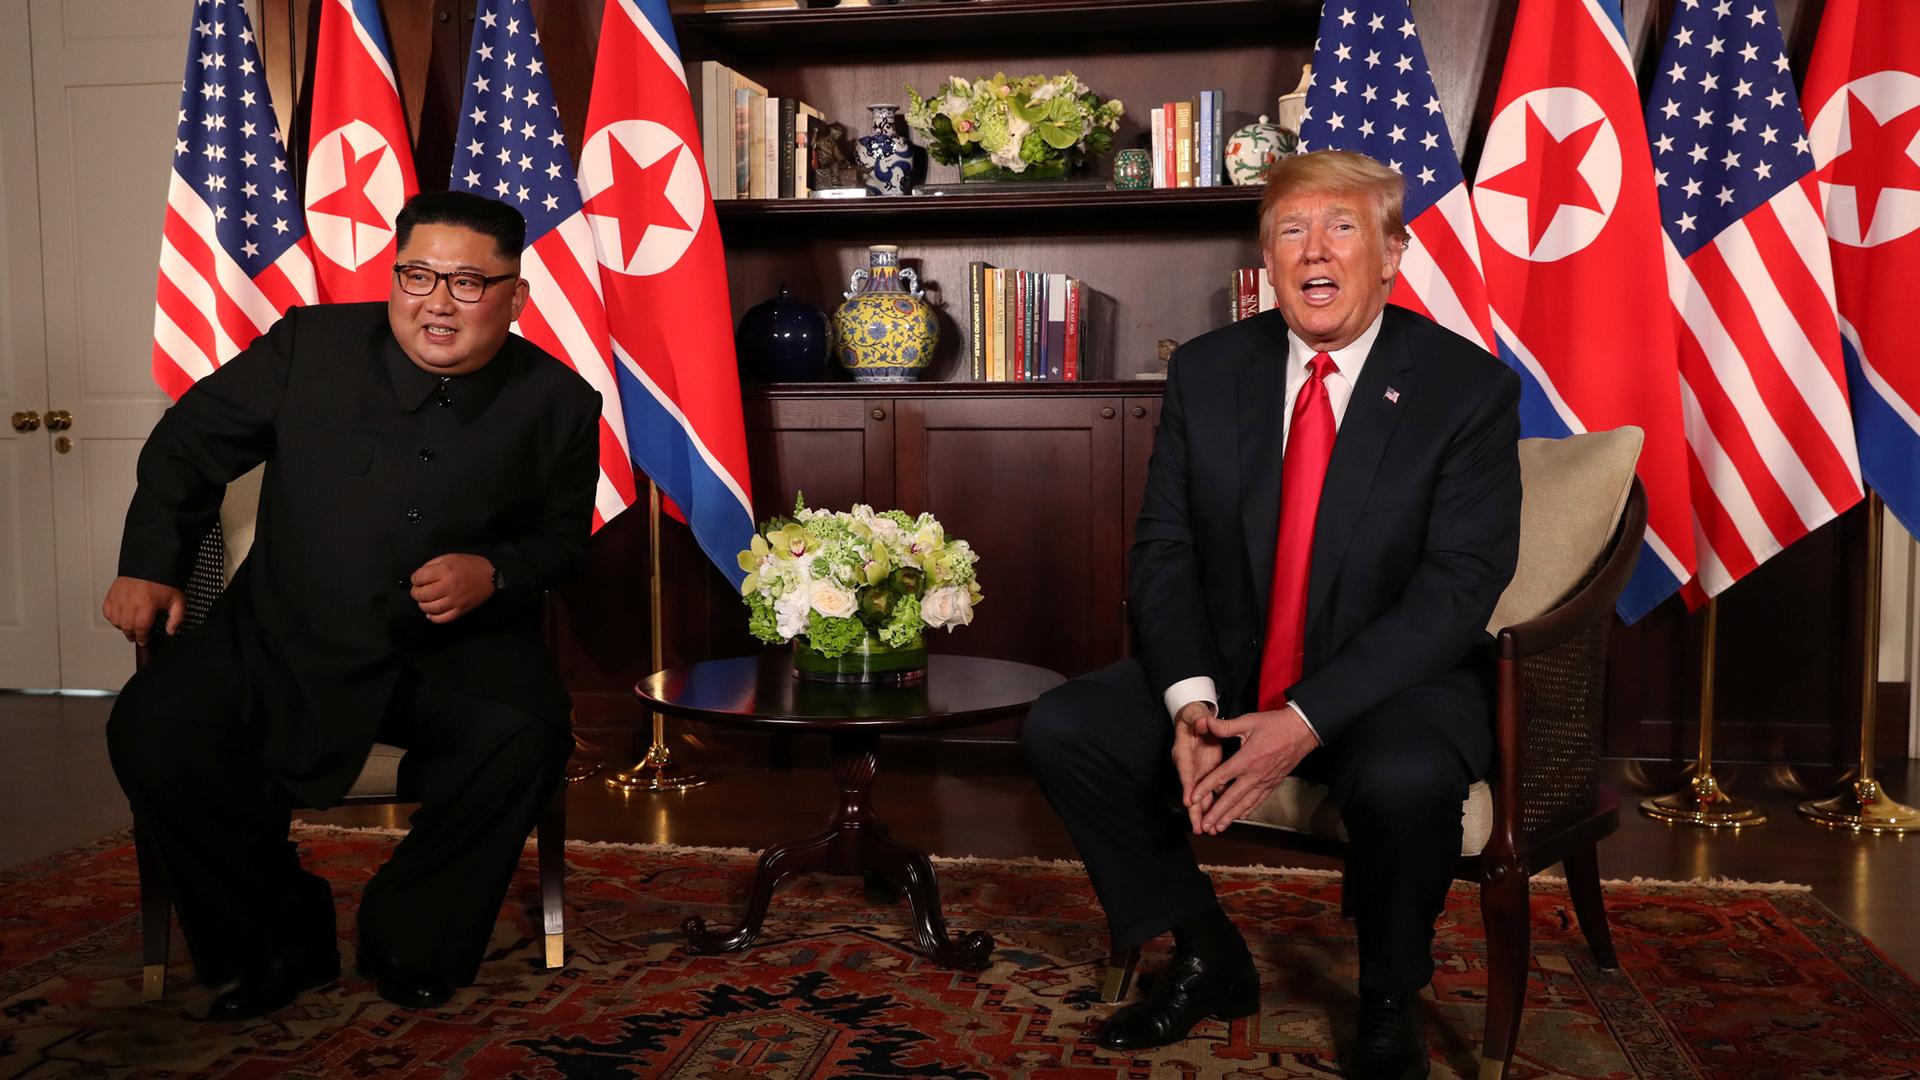 US President Donald Trump sits next to North Korea's leader Kim Jong-un with the flags of both countries behind them.